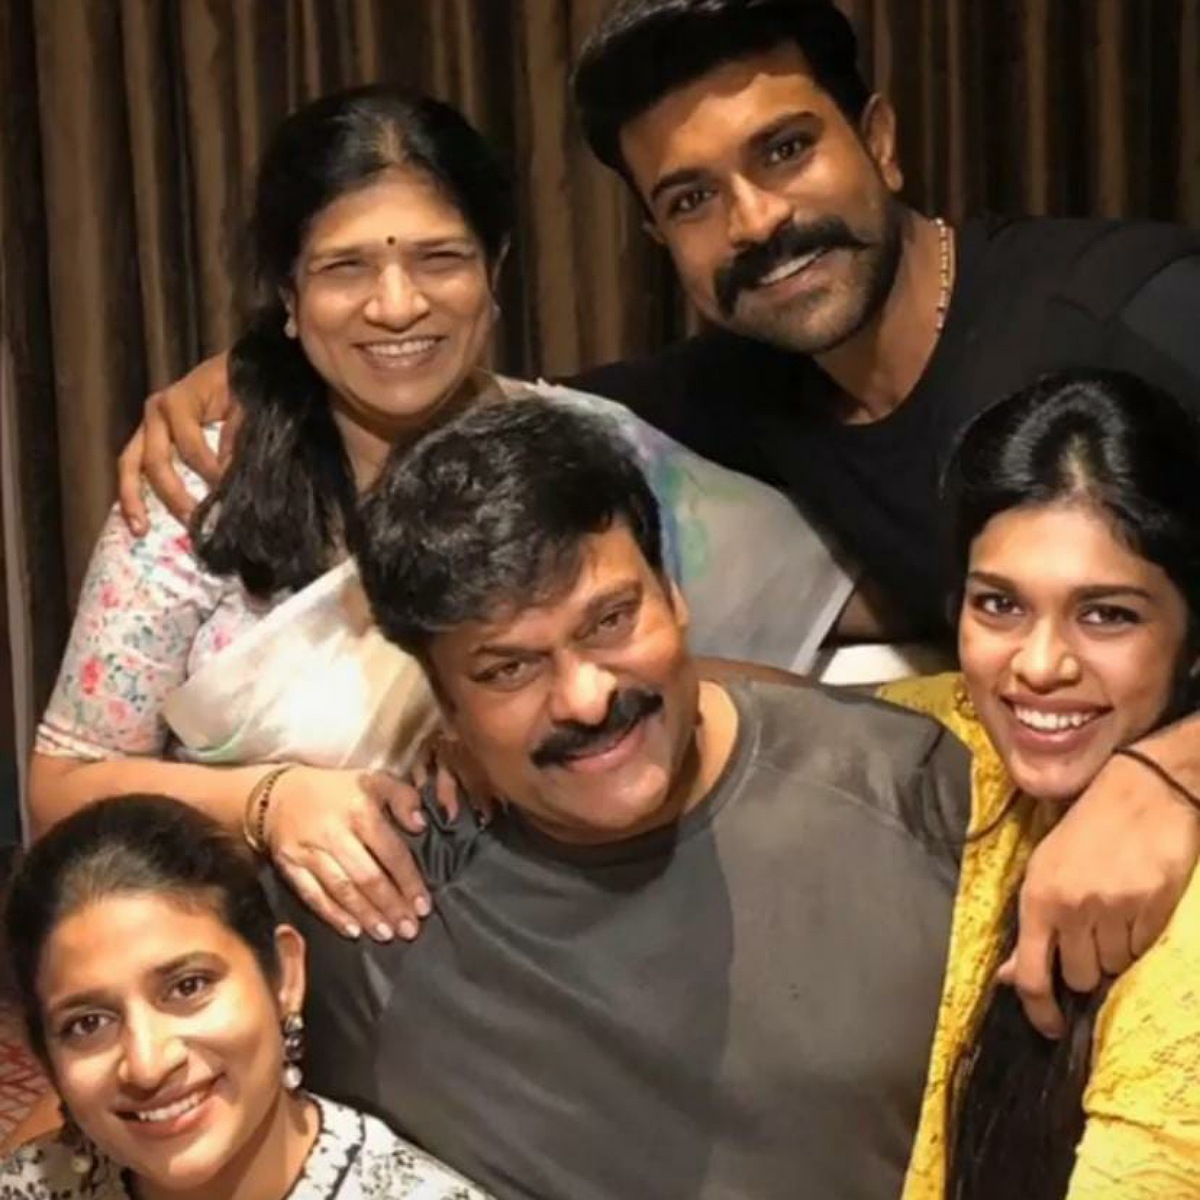 PHOTOS: Megastar Chiranjeevi puts family before everything and here are some heartwarming moments to prove it